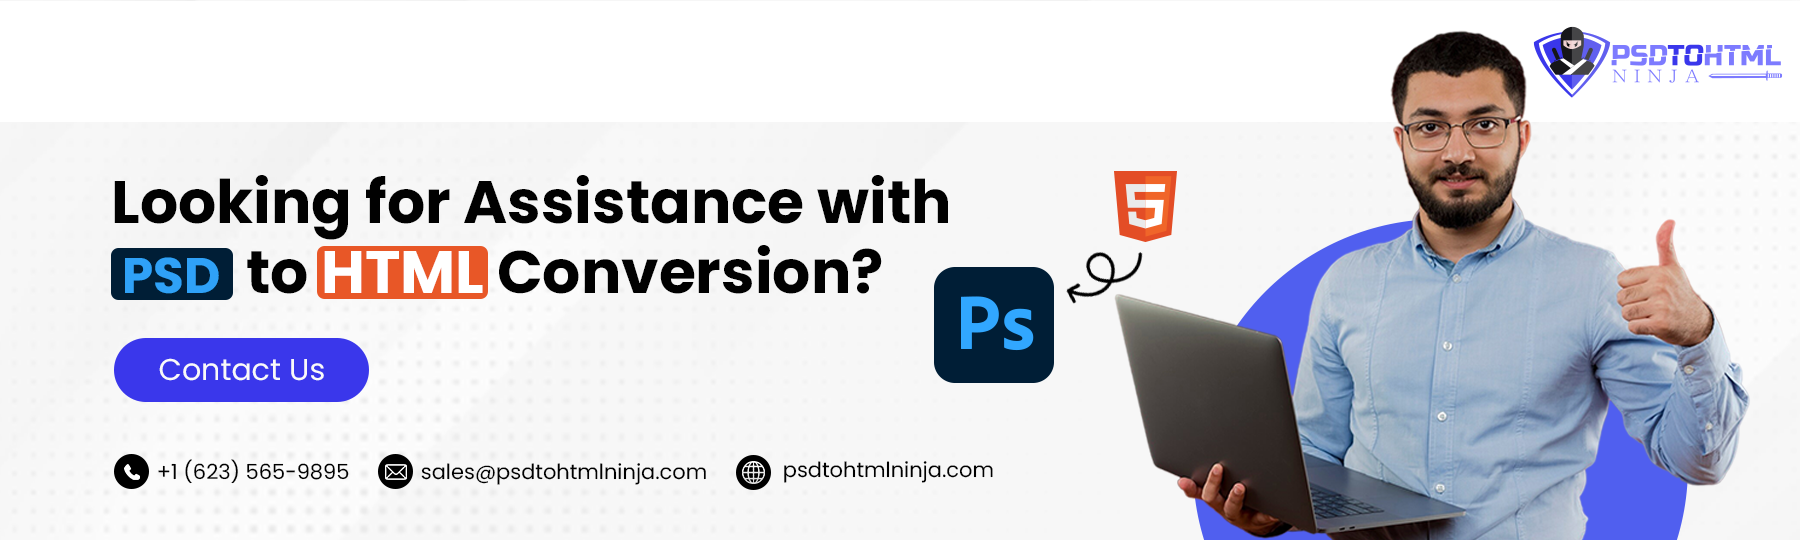 looking-for-assistance-with-psd-to-html-conversion